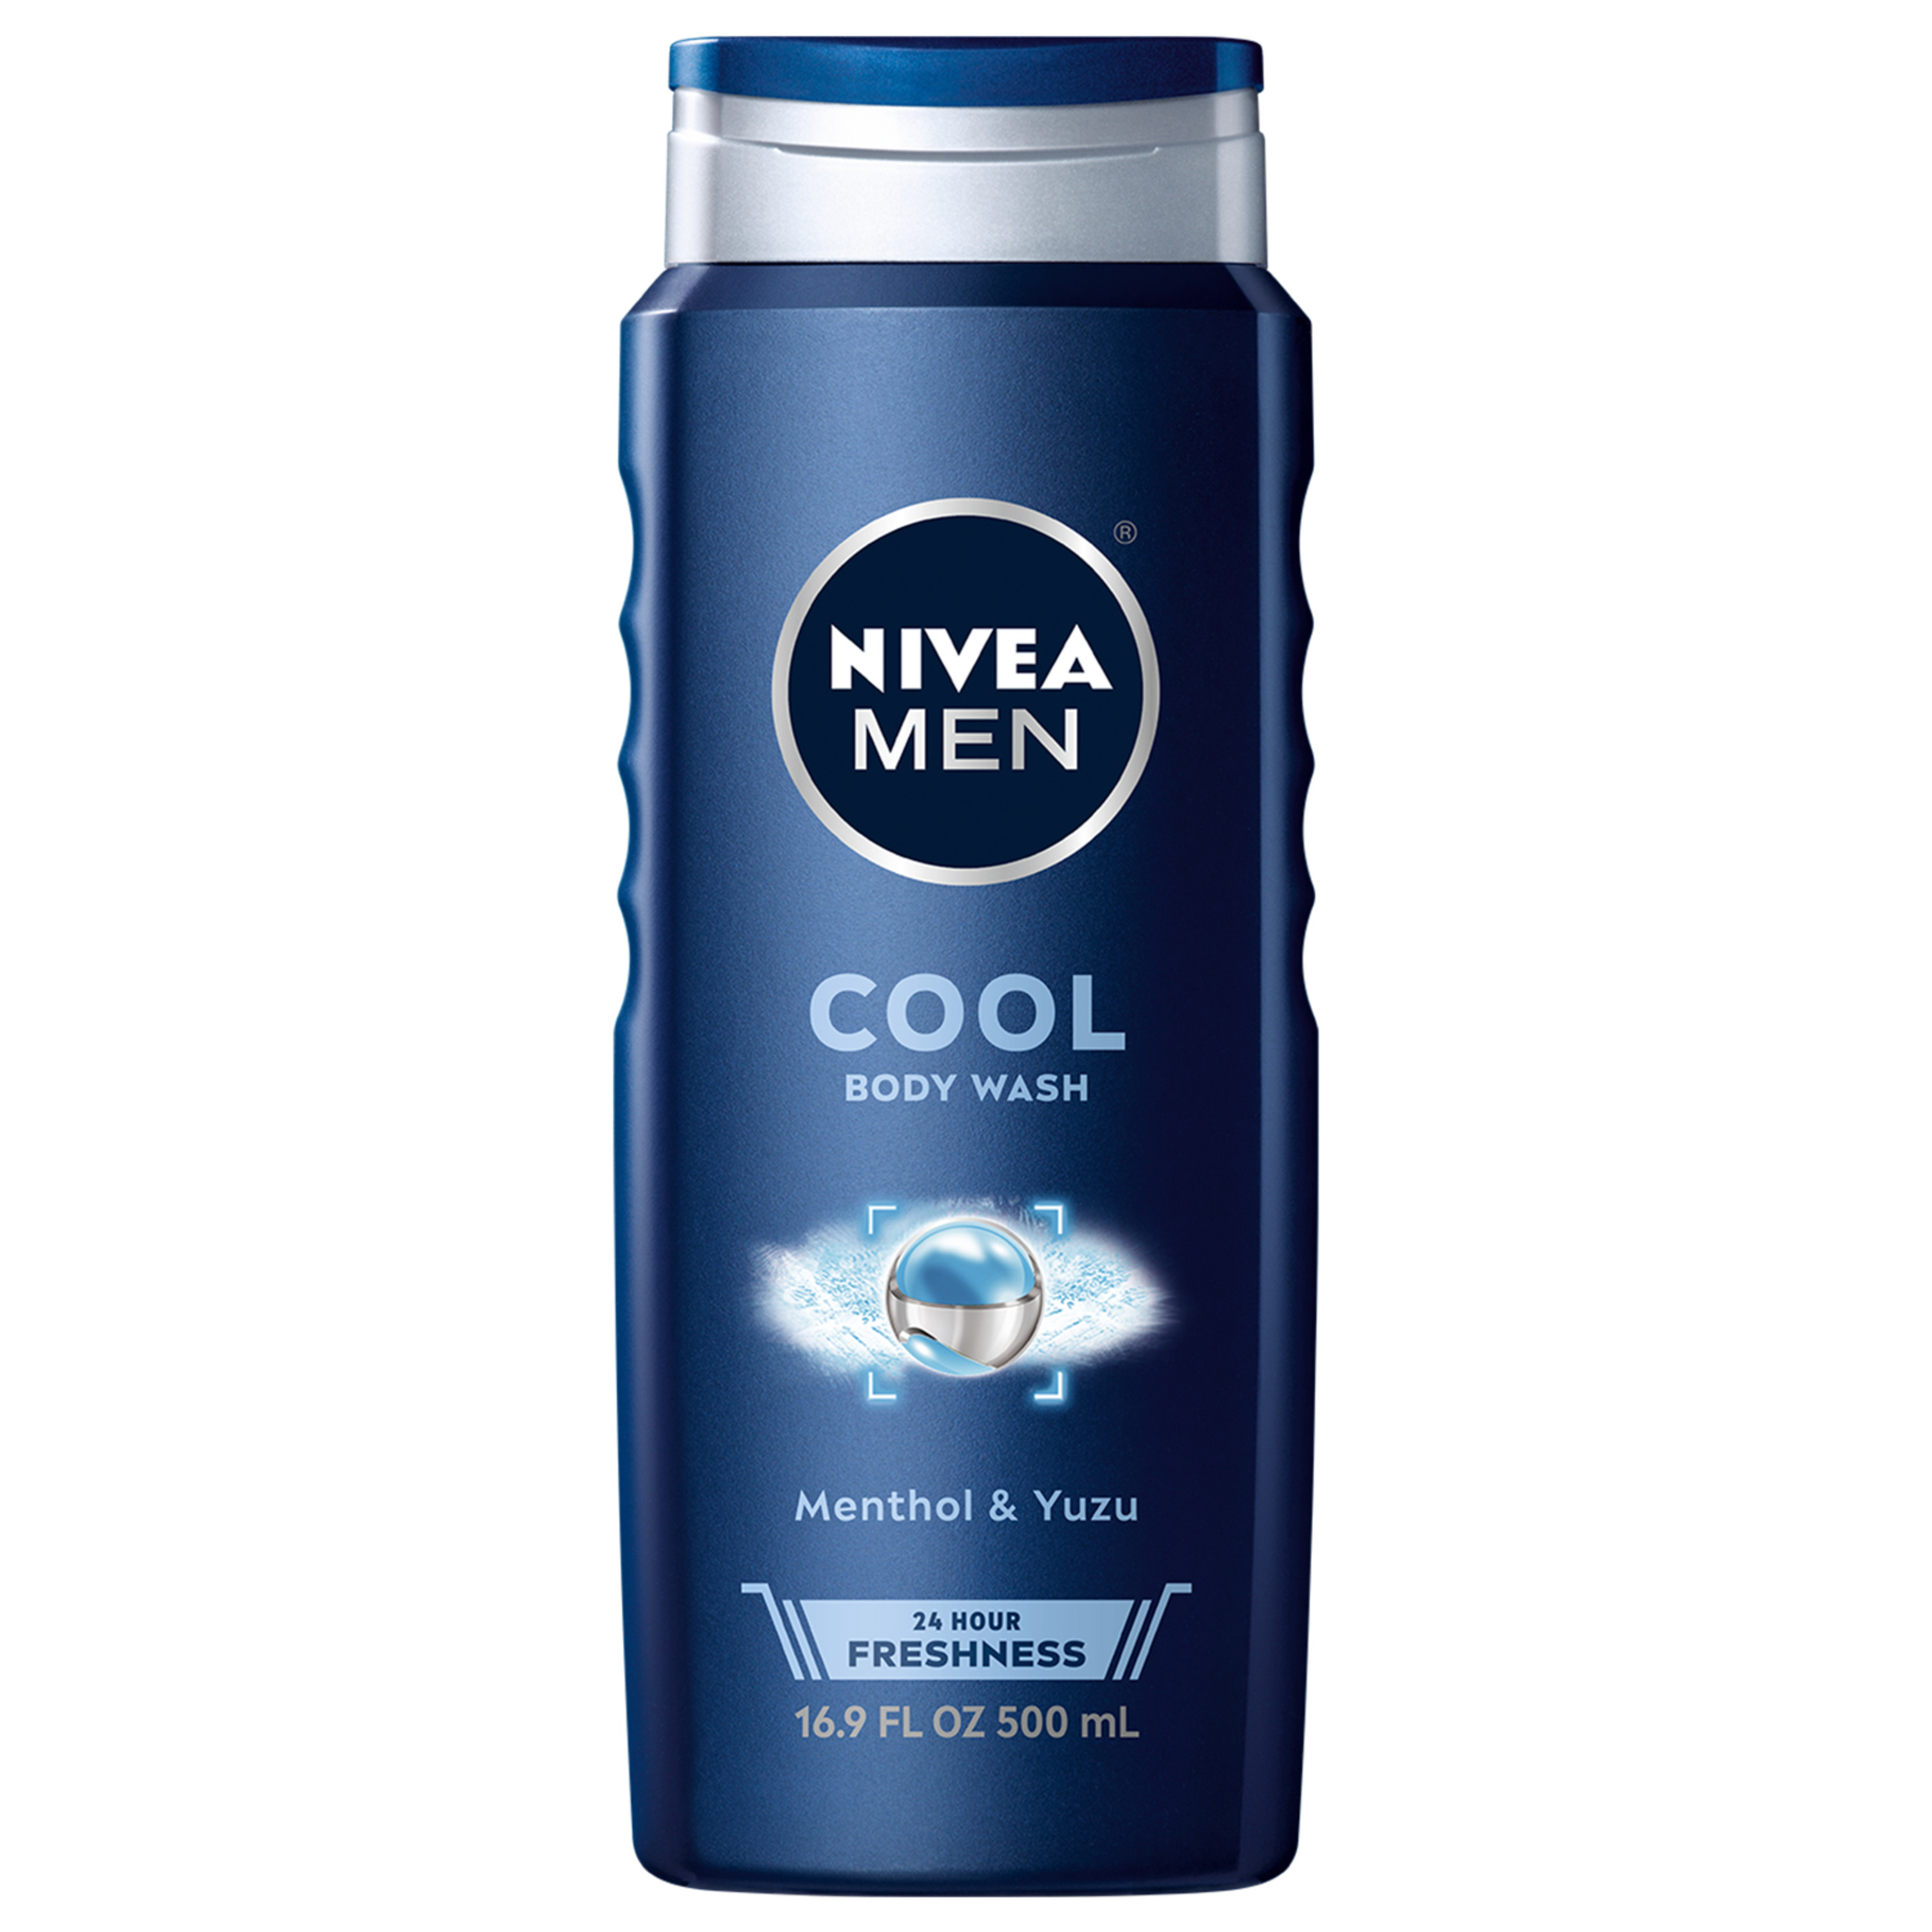 NIVEA MEN Cool Body Wash with Icy Menthol, Scented Body Wash for Men, 16.9 fl oz Bottle - image 1 of 8